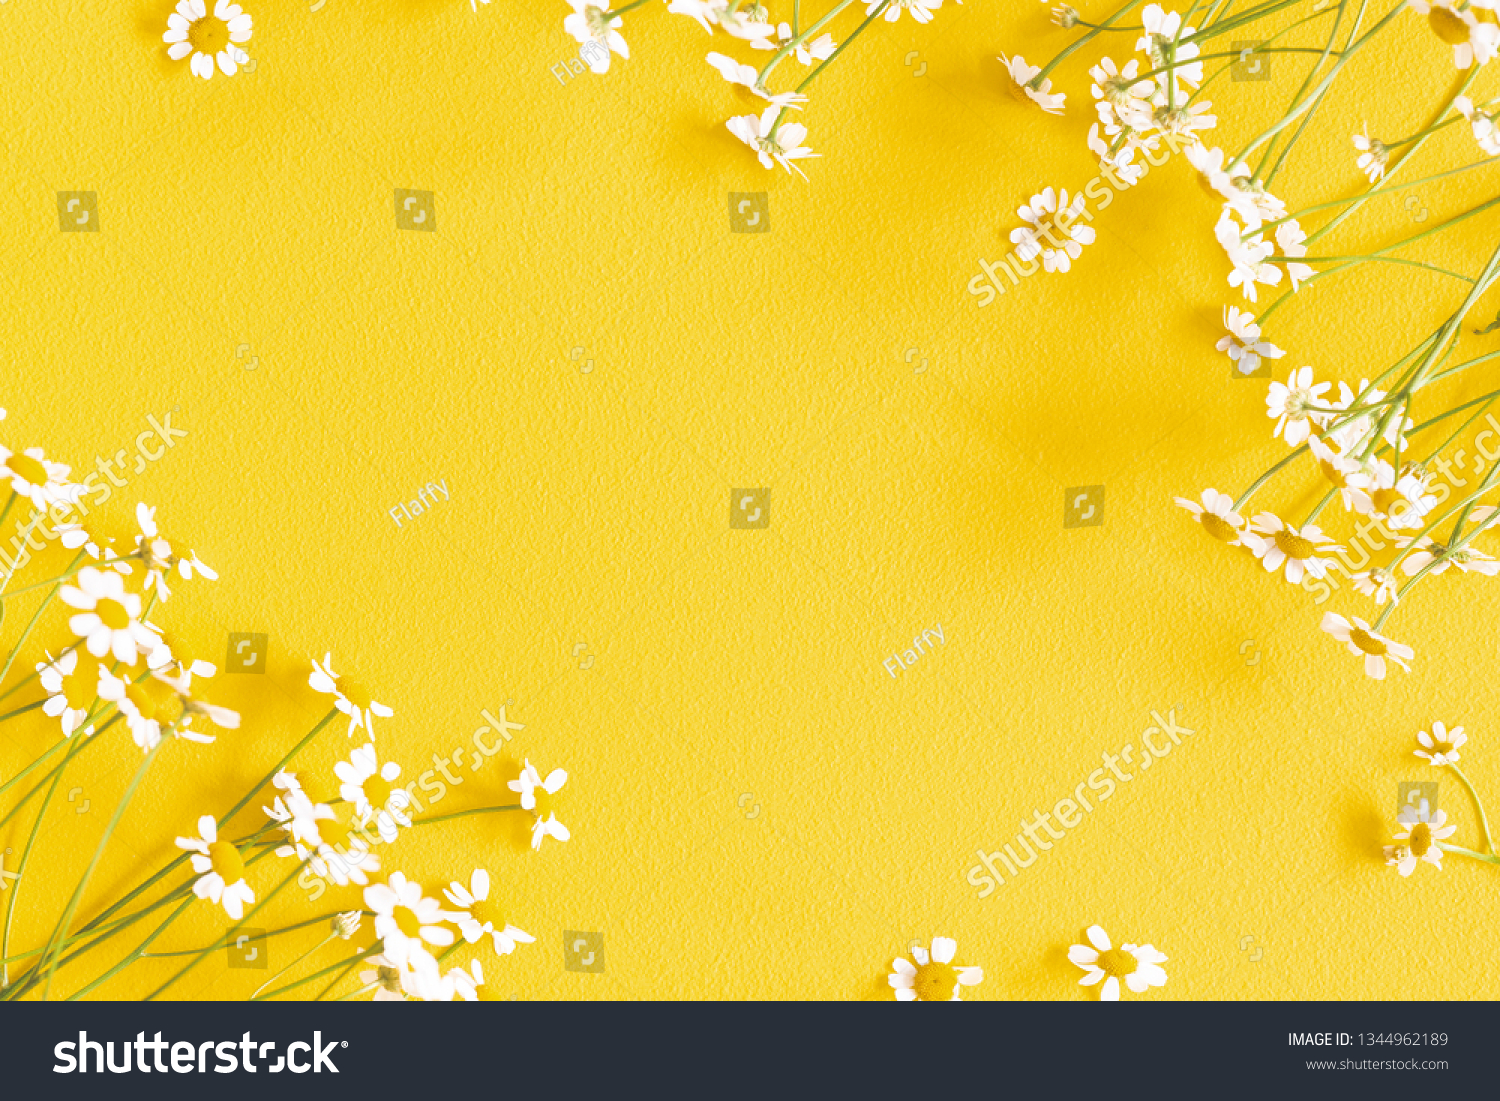 Flowers composition. Chamomile flowers on yellow background. Spring, summer concept. Flat lay, top view, copy space #1344962189